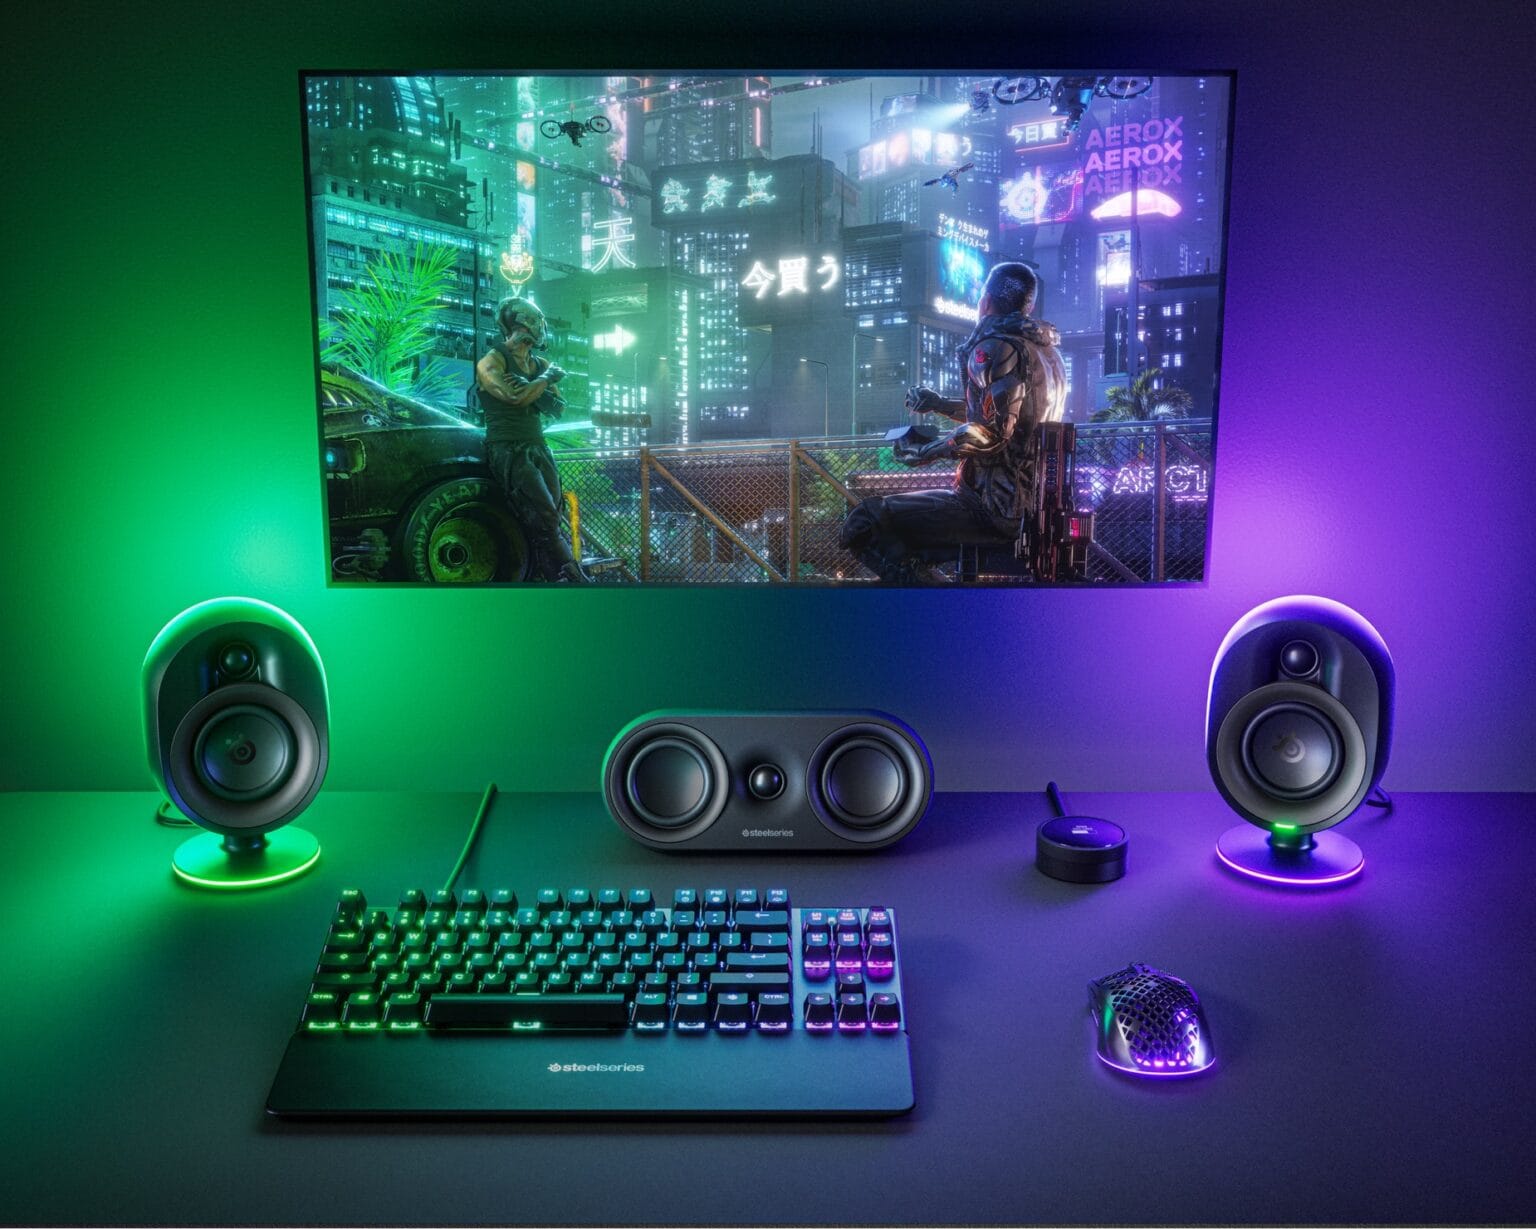 Steelseries said its new Arena 9 is the first 5.1 surround sound system that works via a single USB connection.